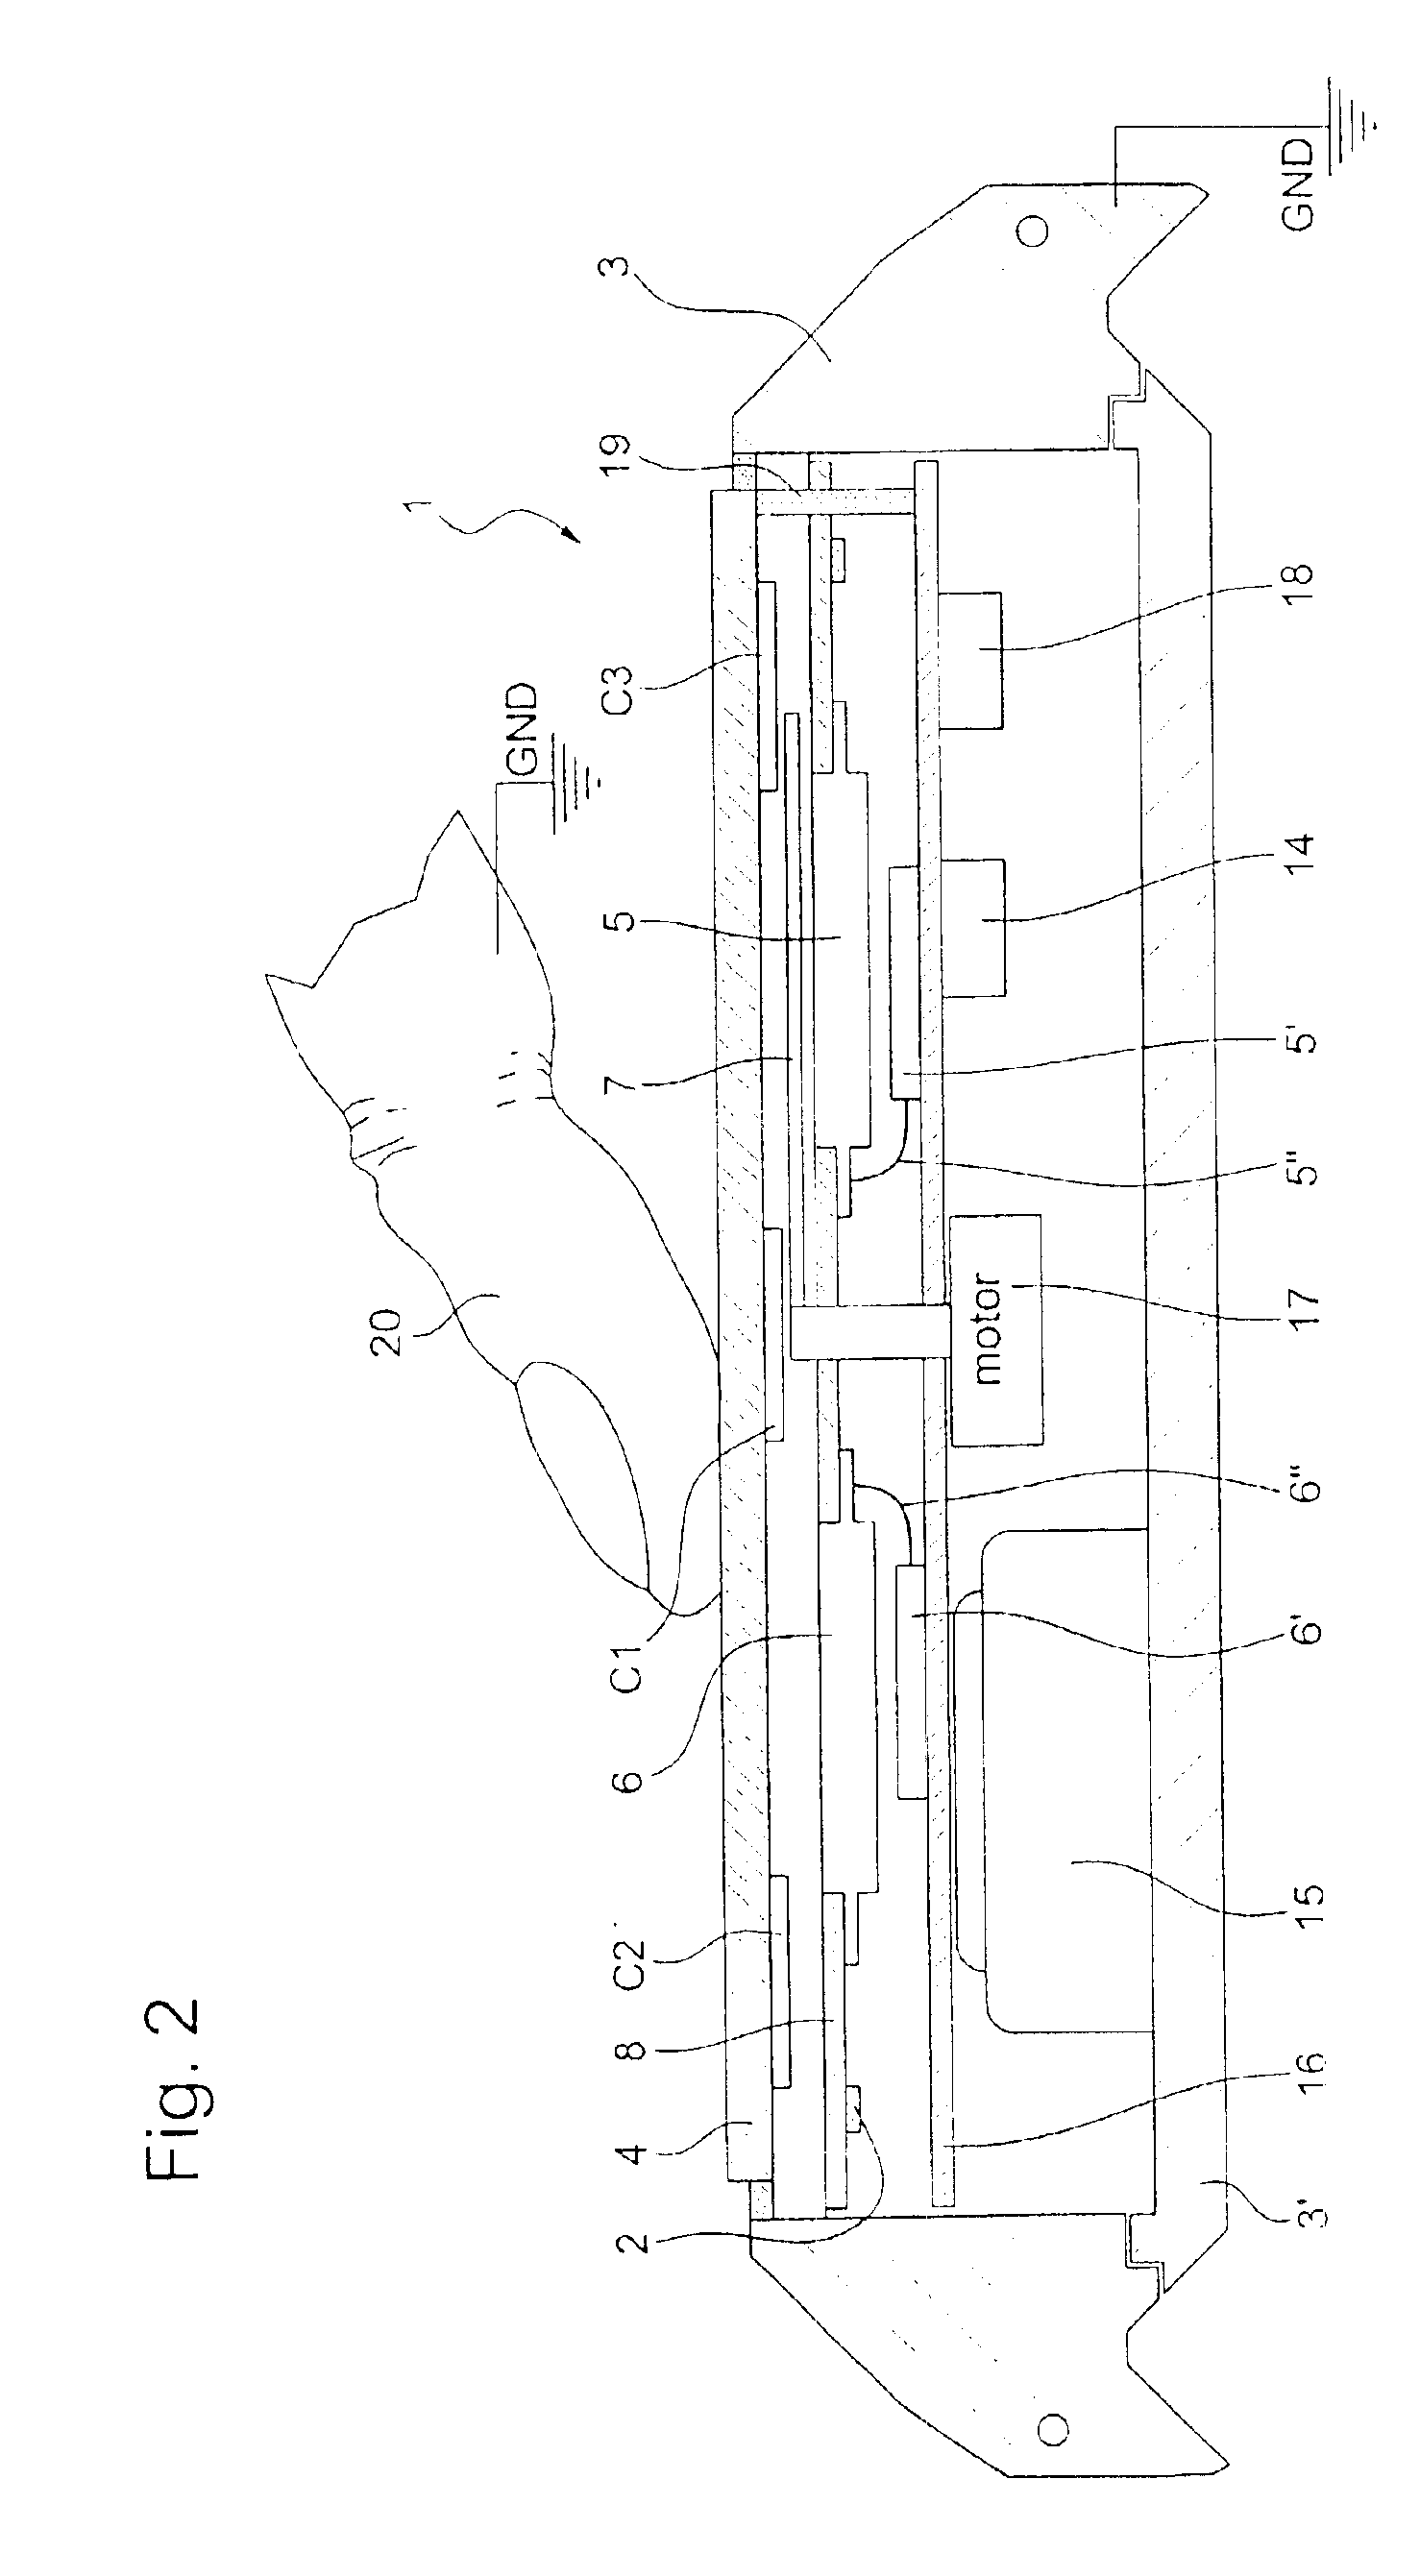 Manual control device for executing functions of an electronic watch